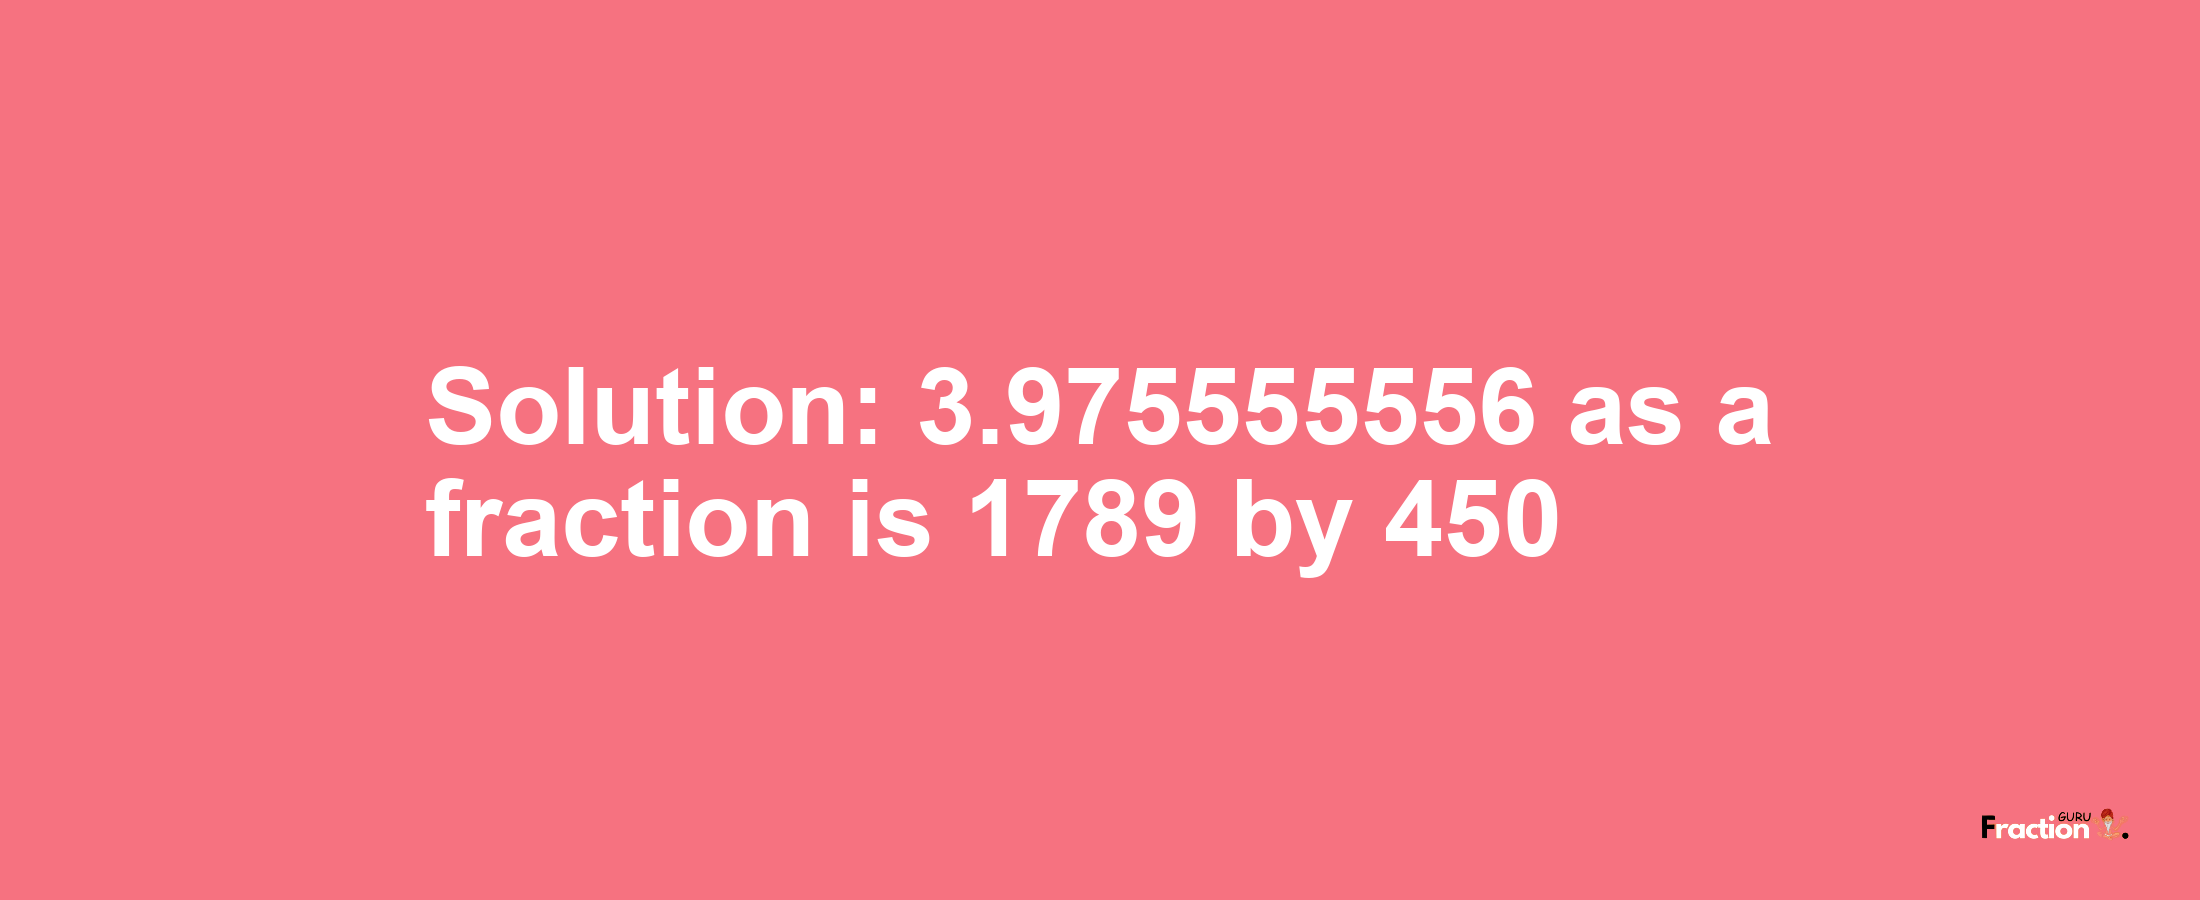 Solution:3.975555556 as a fraction is 1789/450